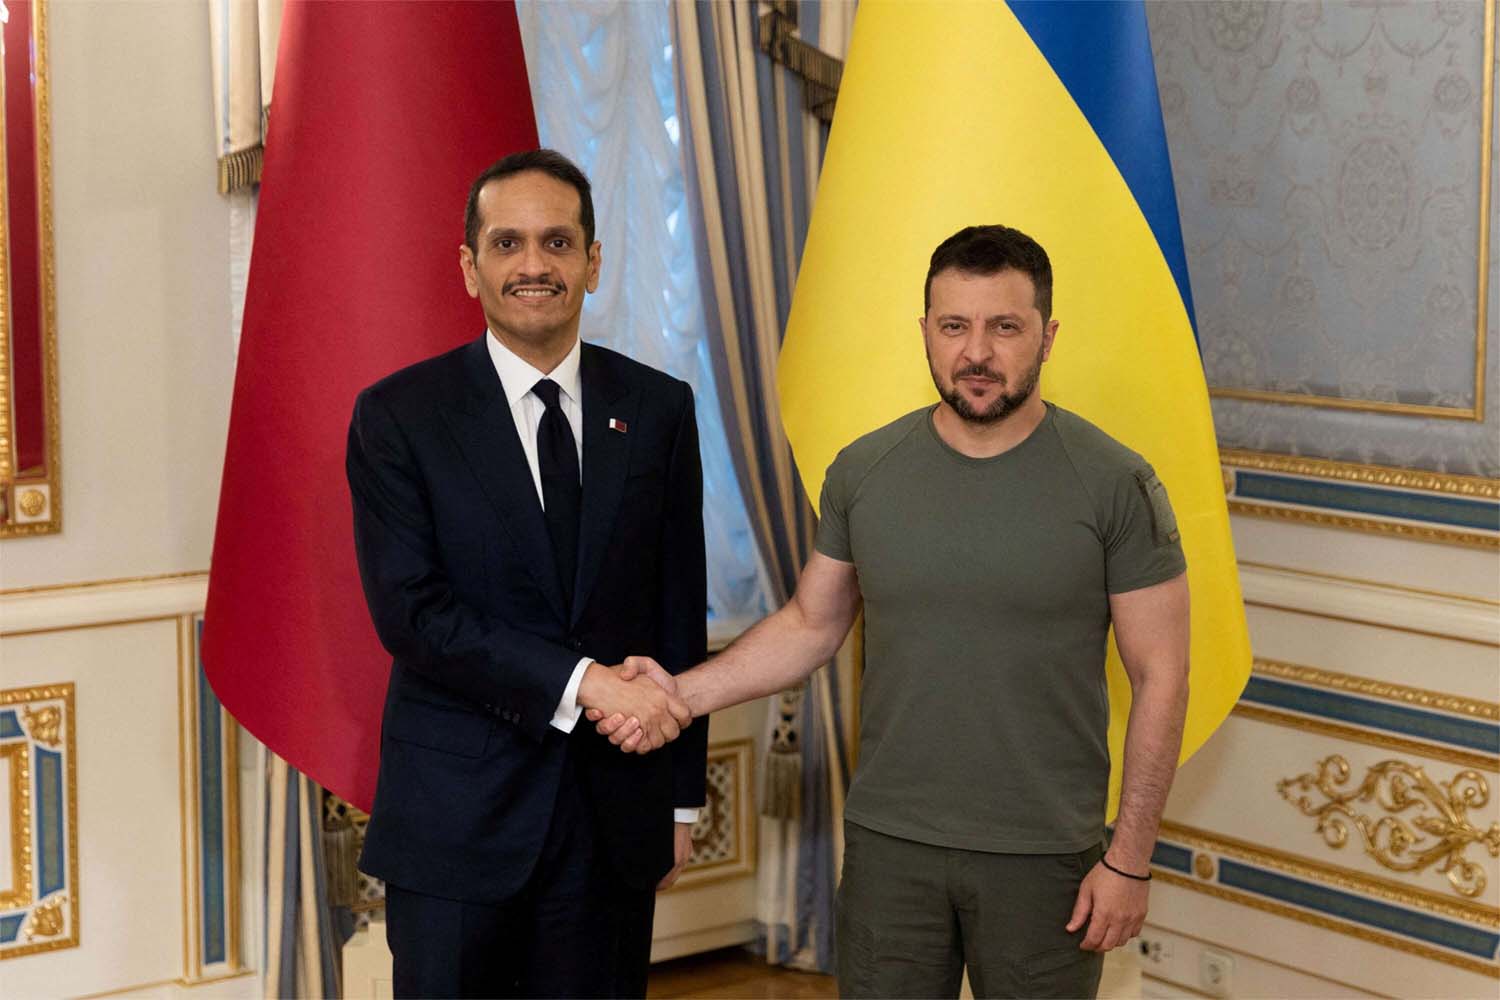 Zelenskiy said his own meeting with the Qatari PM had been meaningful